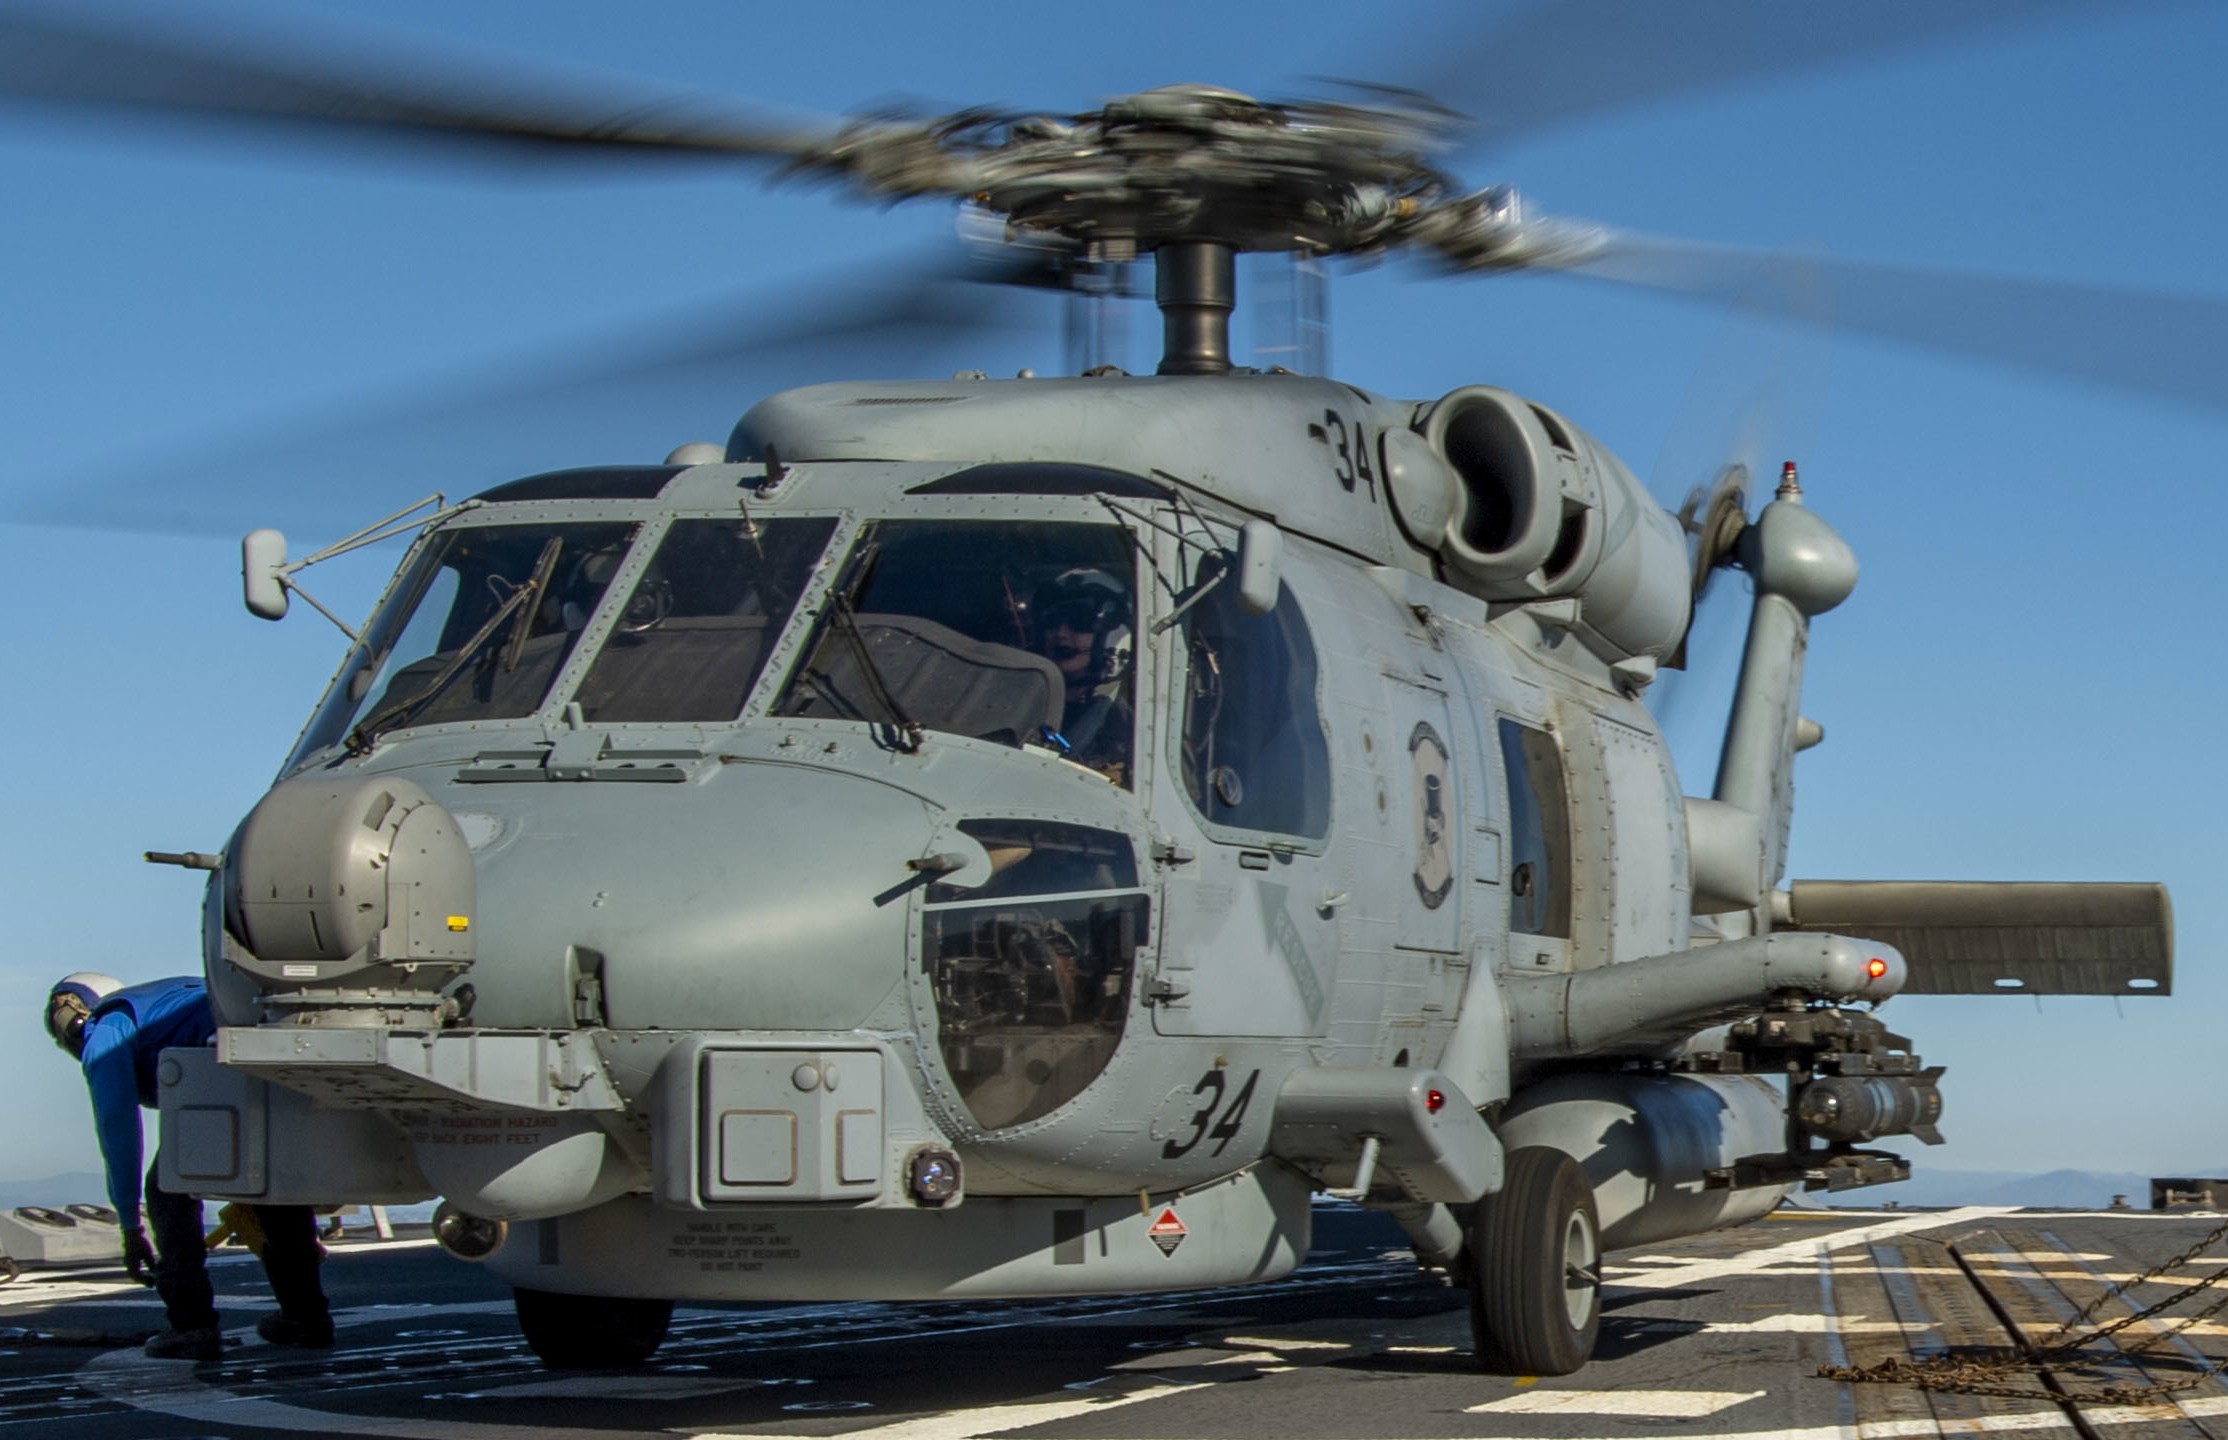 hsm-35 magicians helicopter maritime strike squadron us navy mh-60r seahawk 53